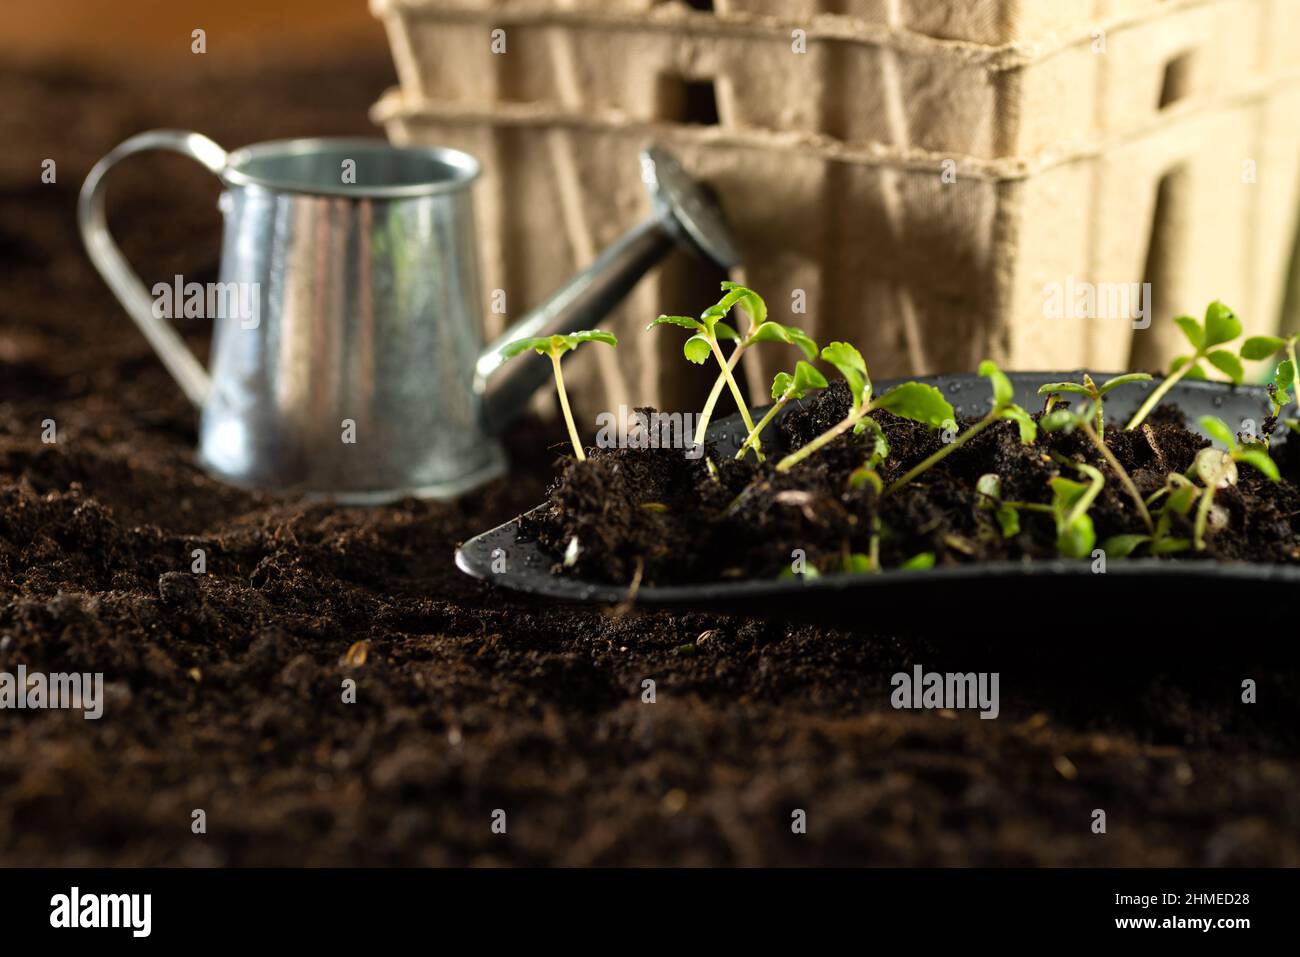 Seeds, gardener prepares the seedlings.Gardener sows seeds are watered and cares sown into pots of peat. Stock Photo